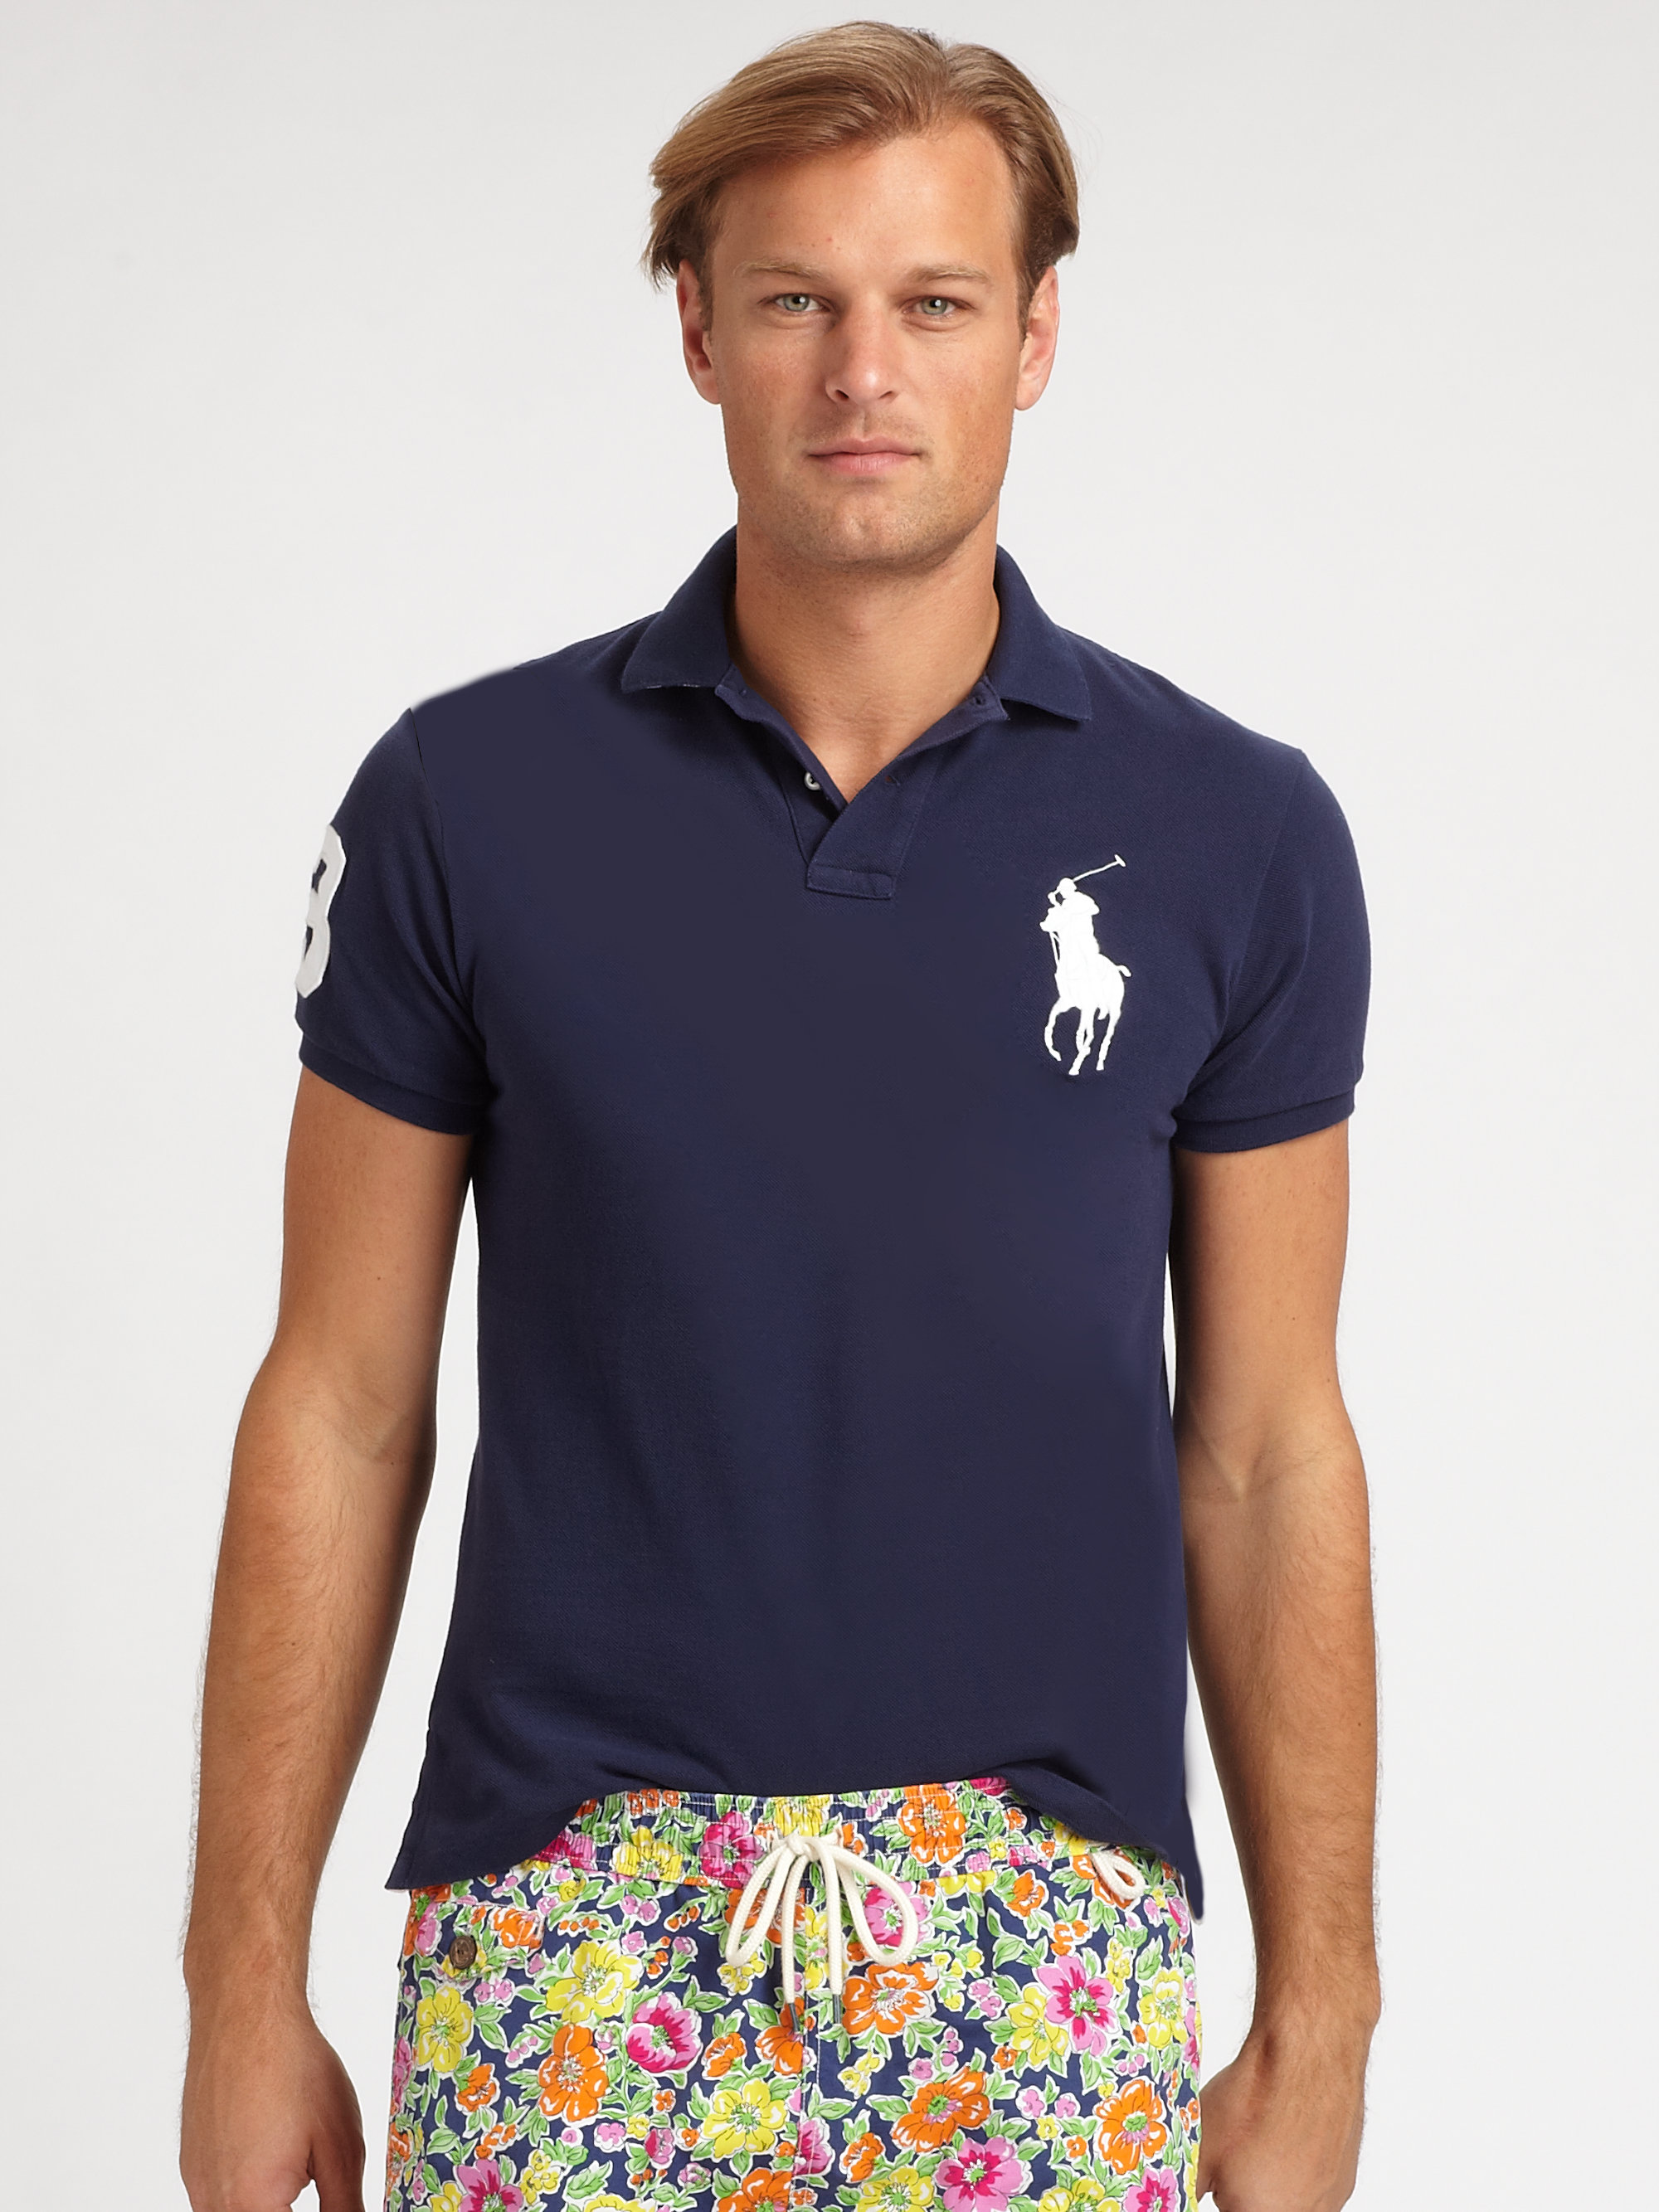 Lyst - Polo Ralph Lauren Pique Big Pony Polo in Blue for Men